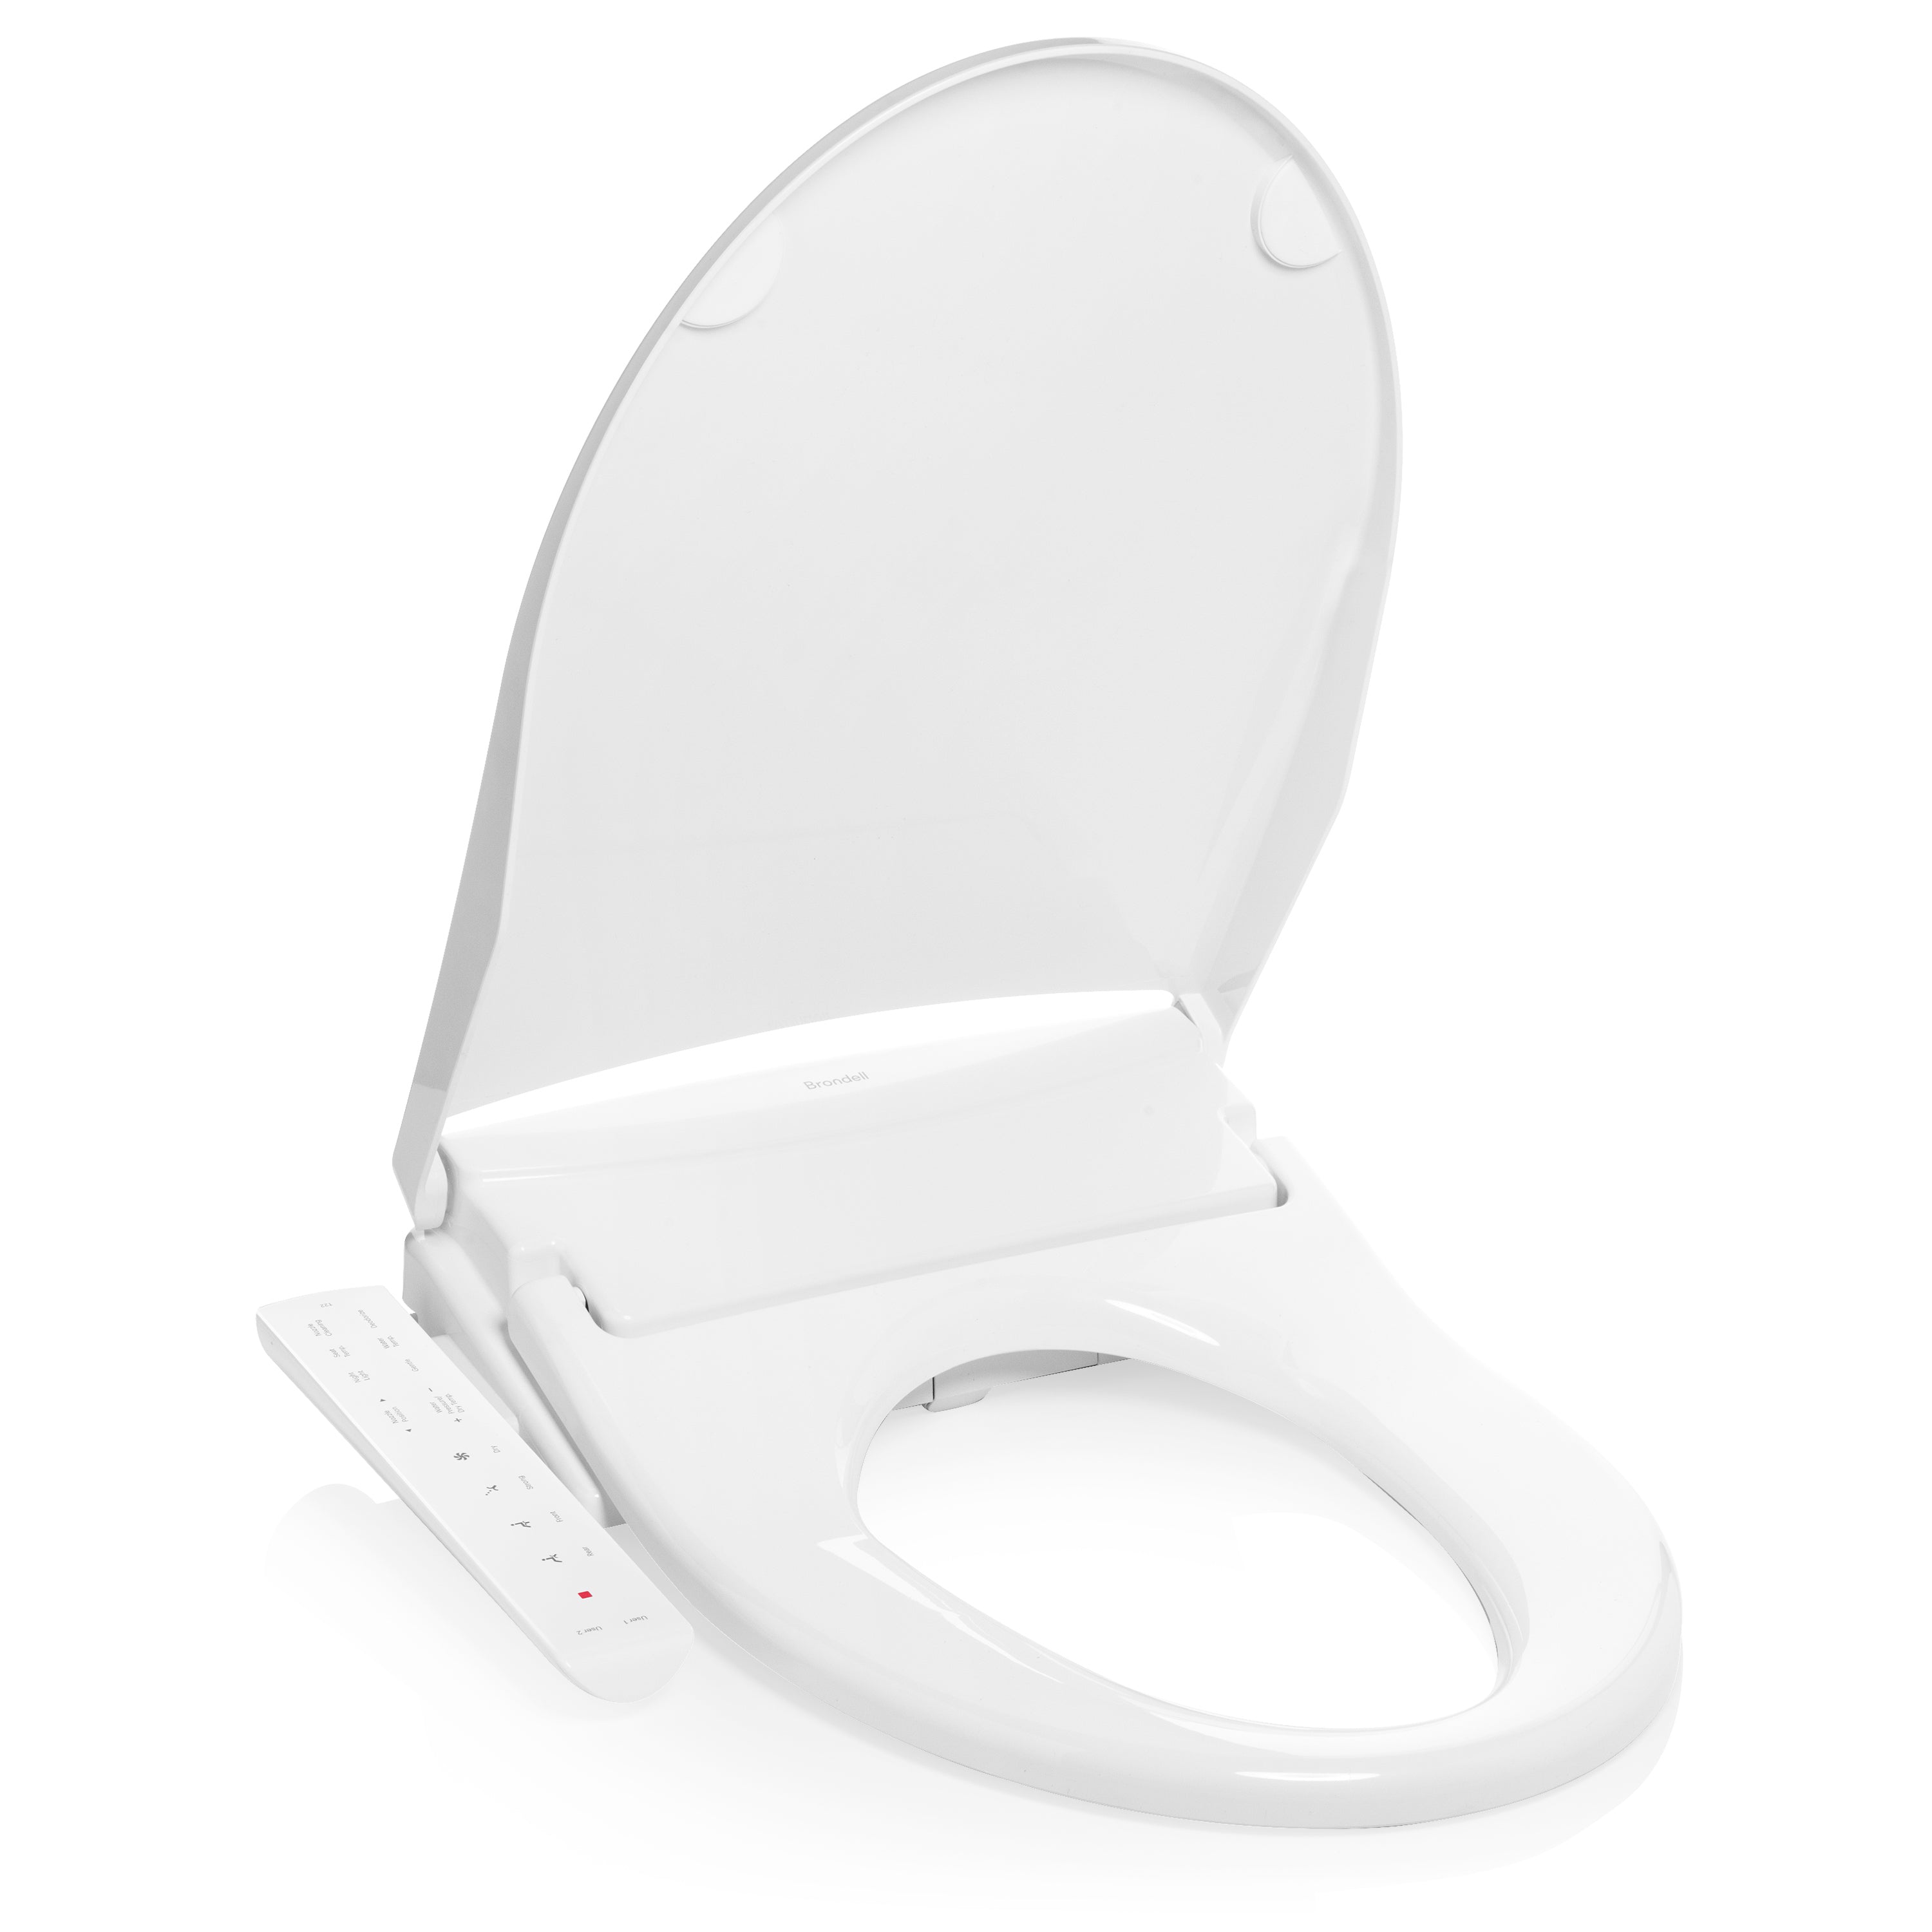 Brondell Swash Thinline T22 Electronic Bidet Seat with Side Arm Control